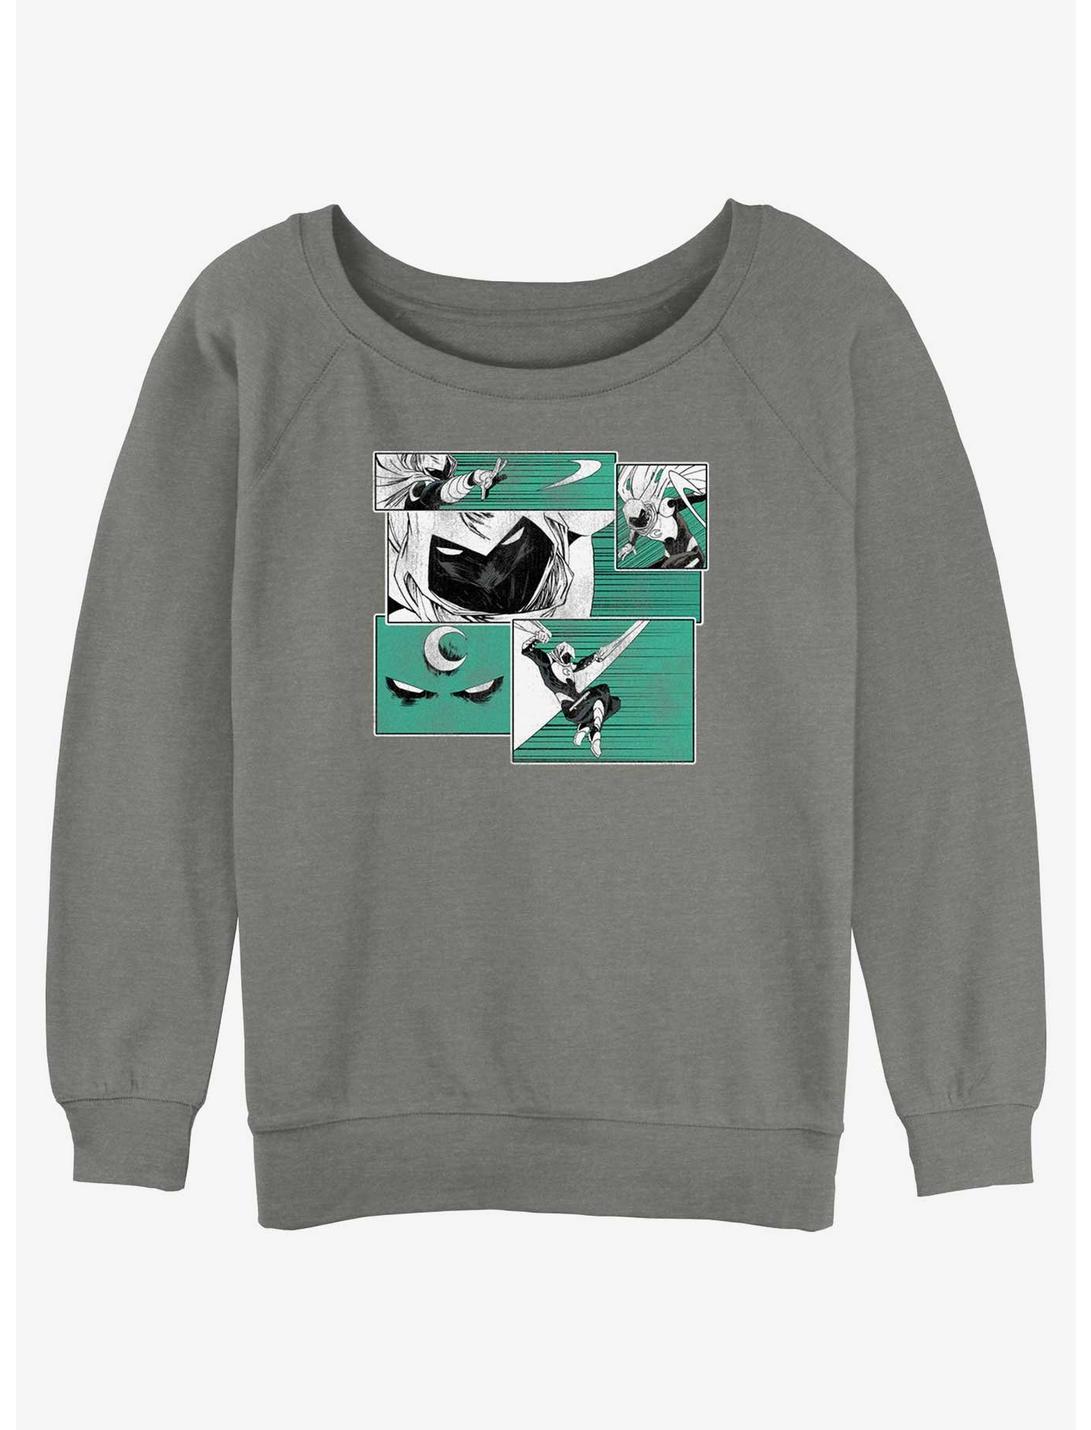 Marvel Moon Knight Action Sequence Girls Slouchy Sweatshirt, GRAY HTR, hi-res